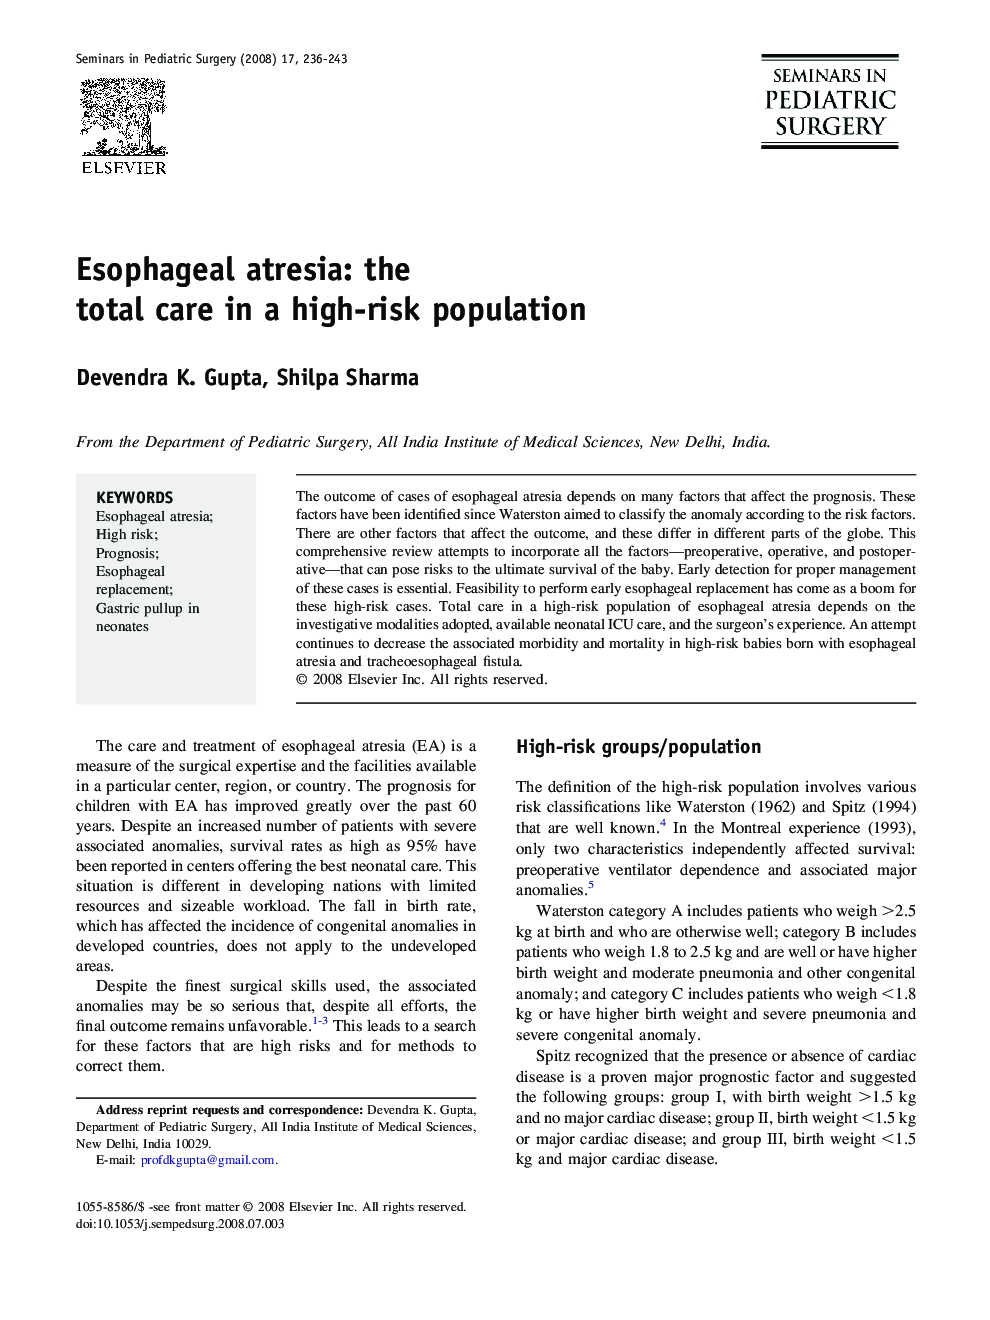 Esophageal atresia: the total care in a high-risk population